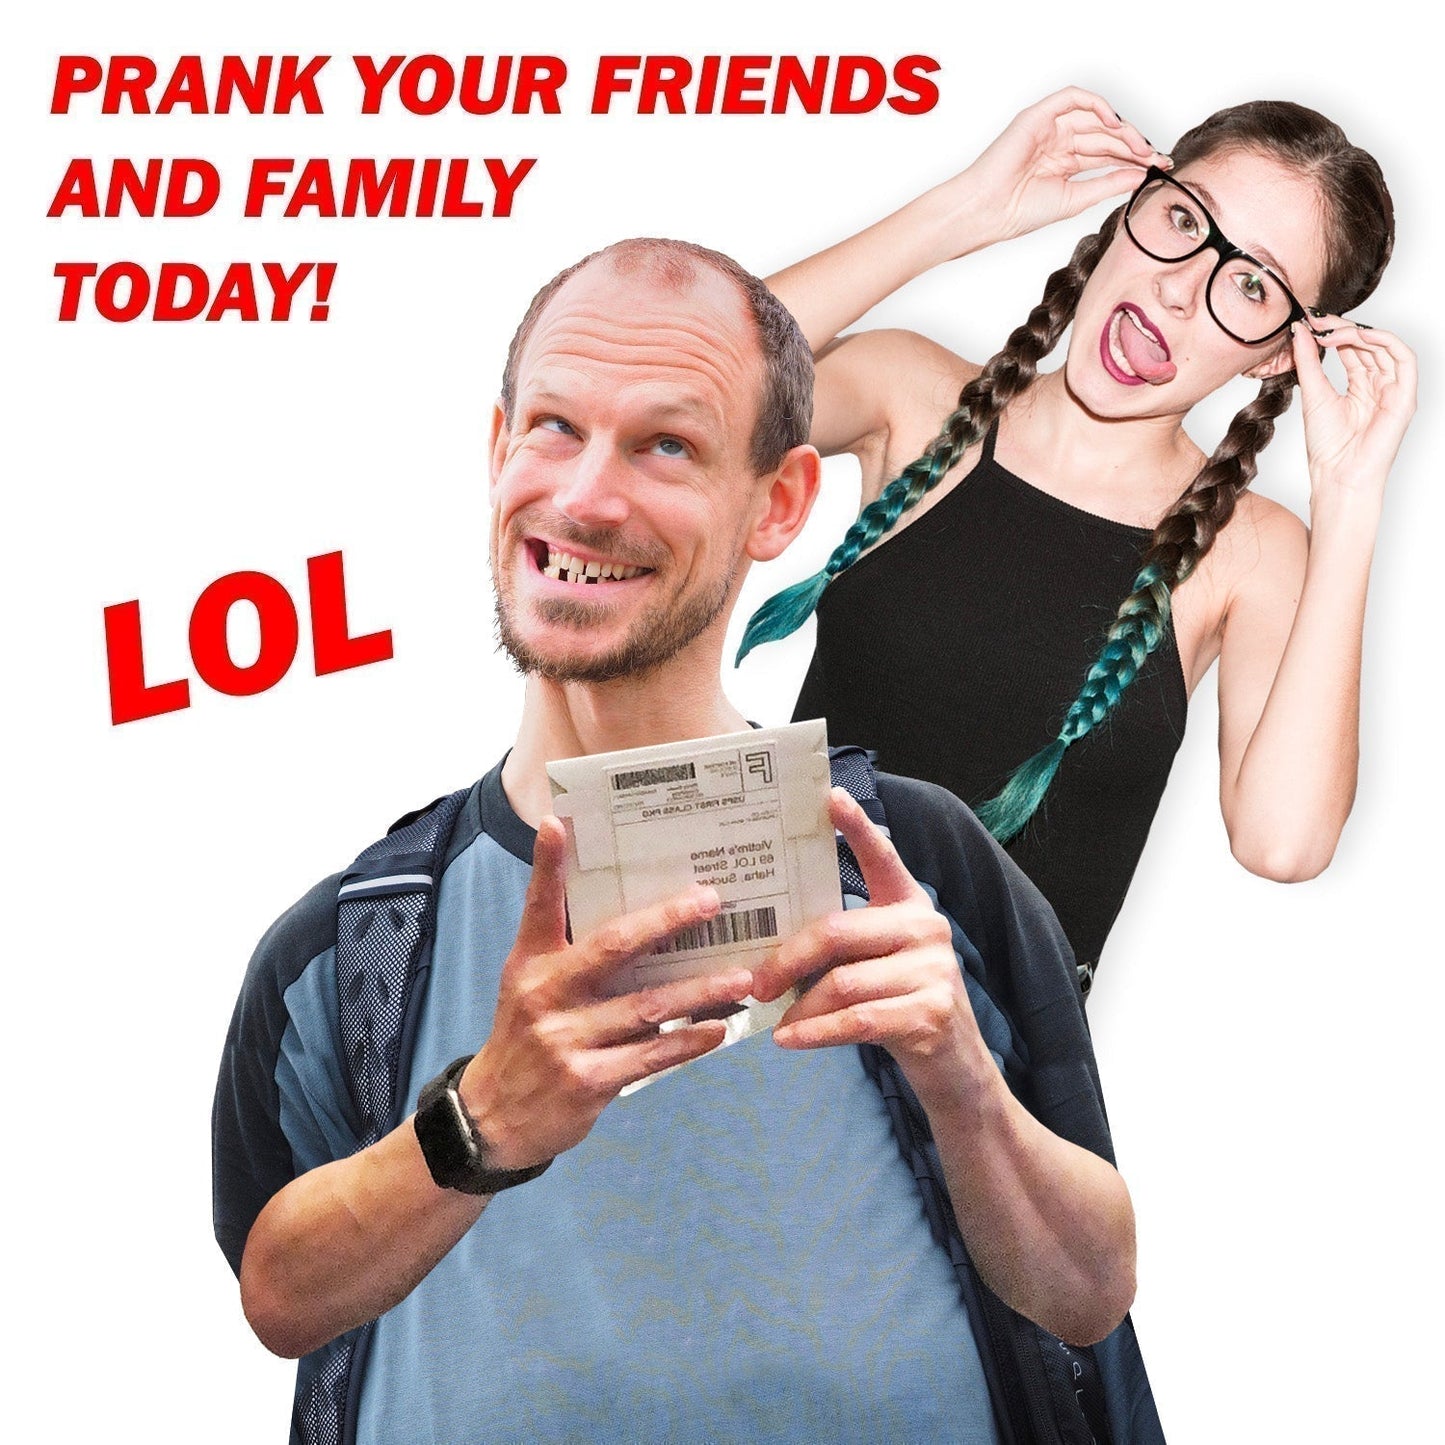 The Pizza Boy Delivers Fake DVD mail prank gets sent directly to your victims 100% anonymously!